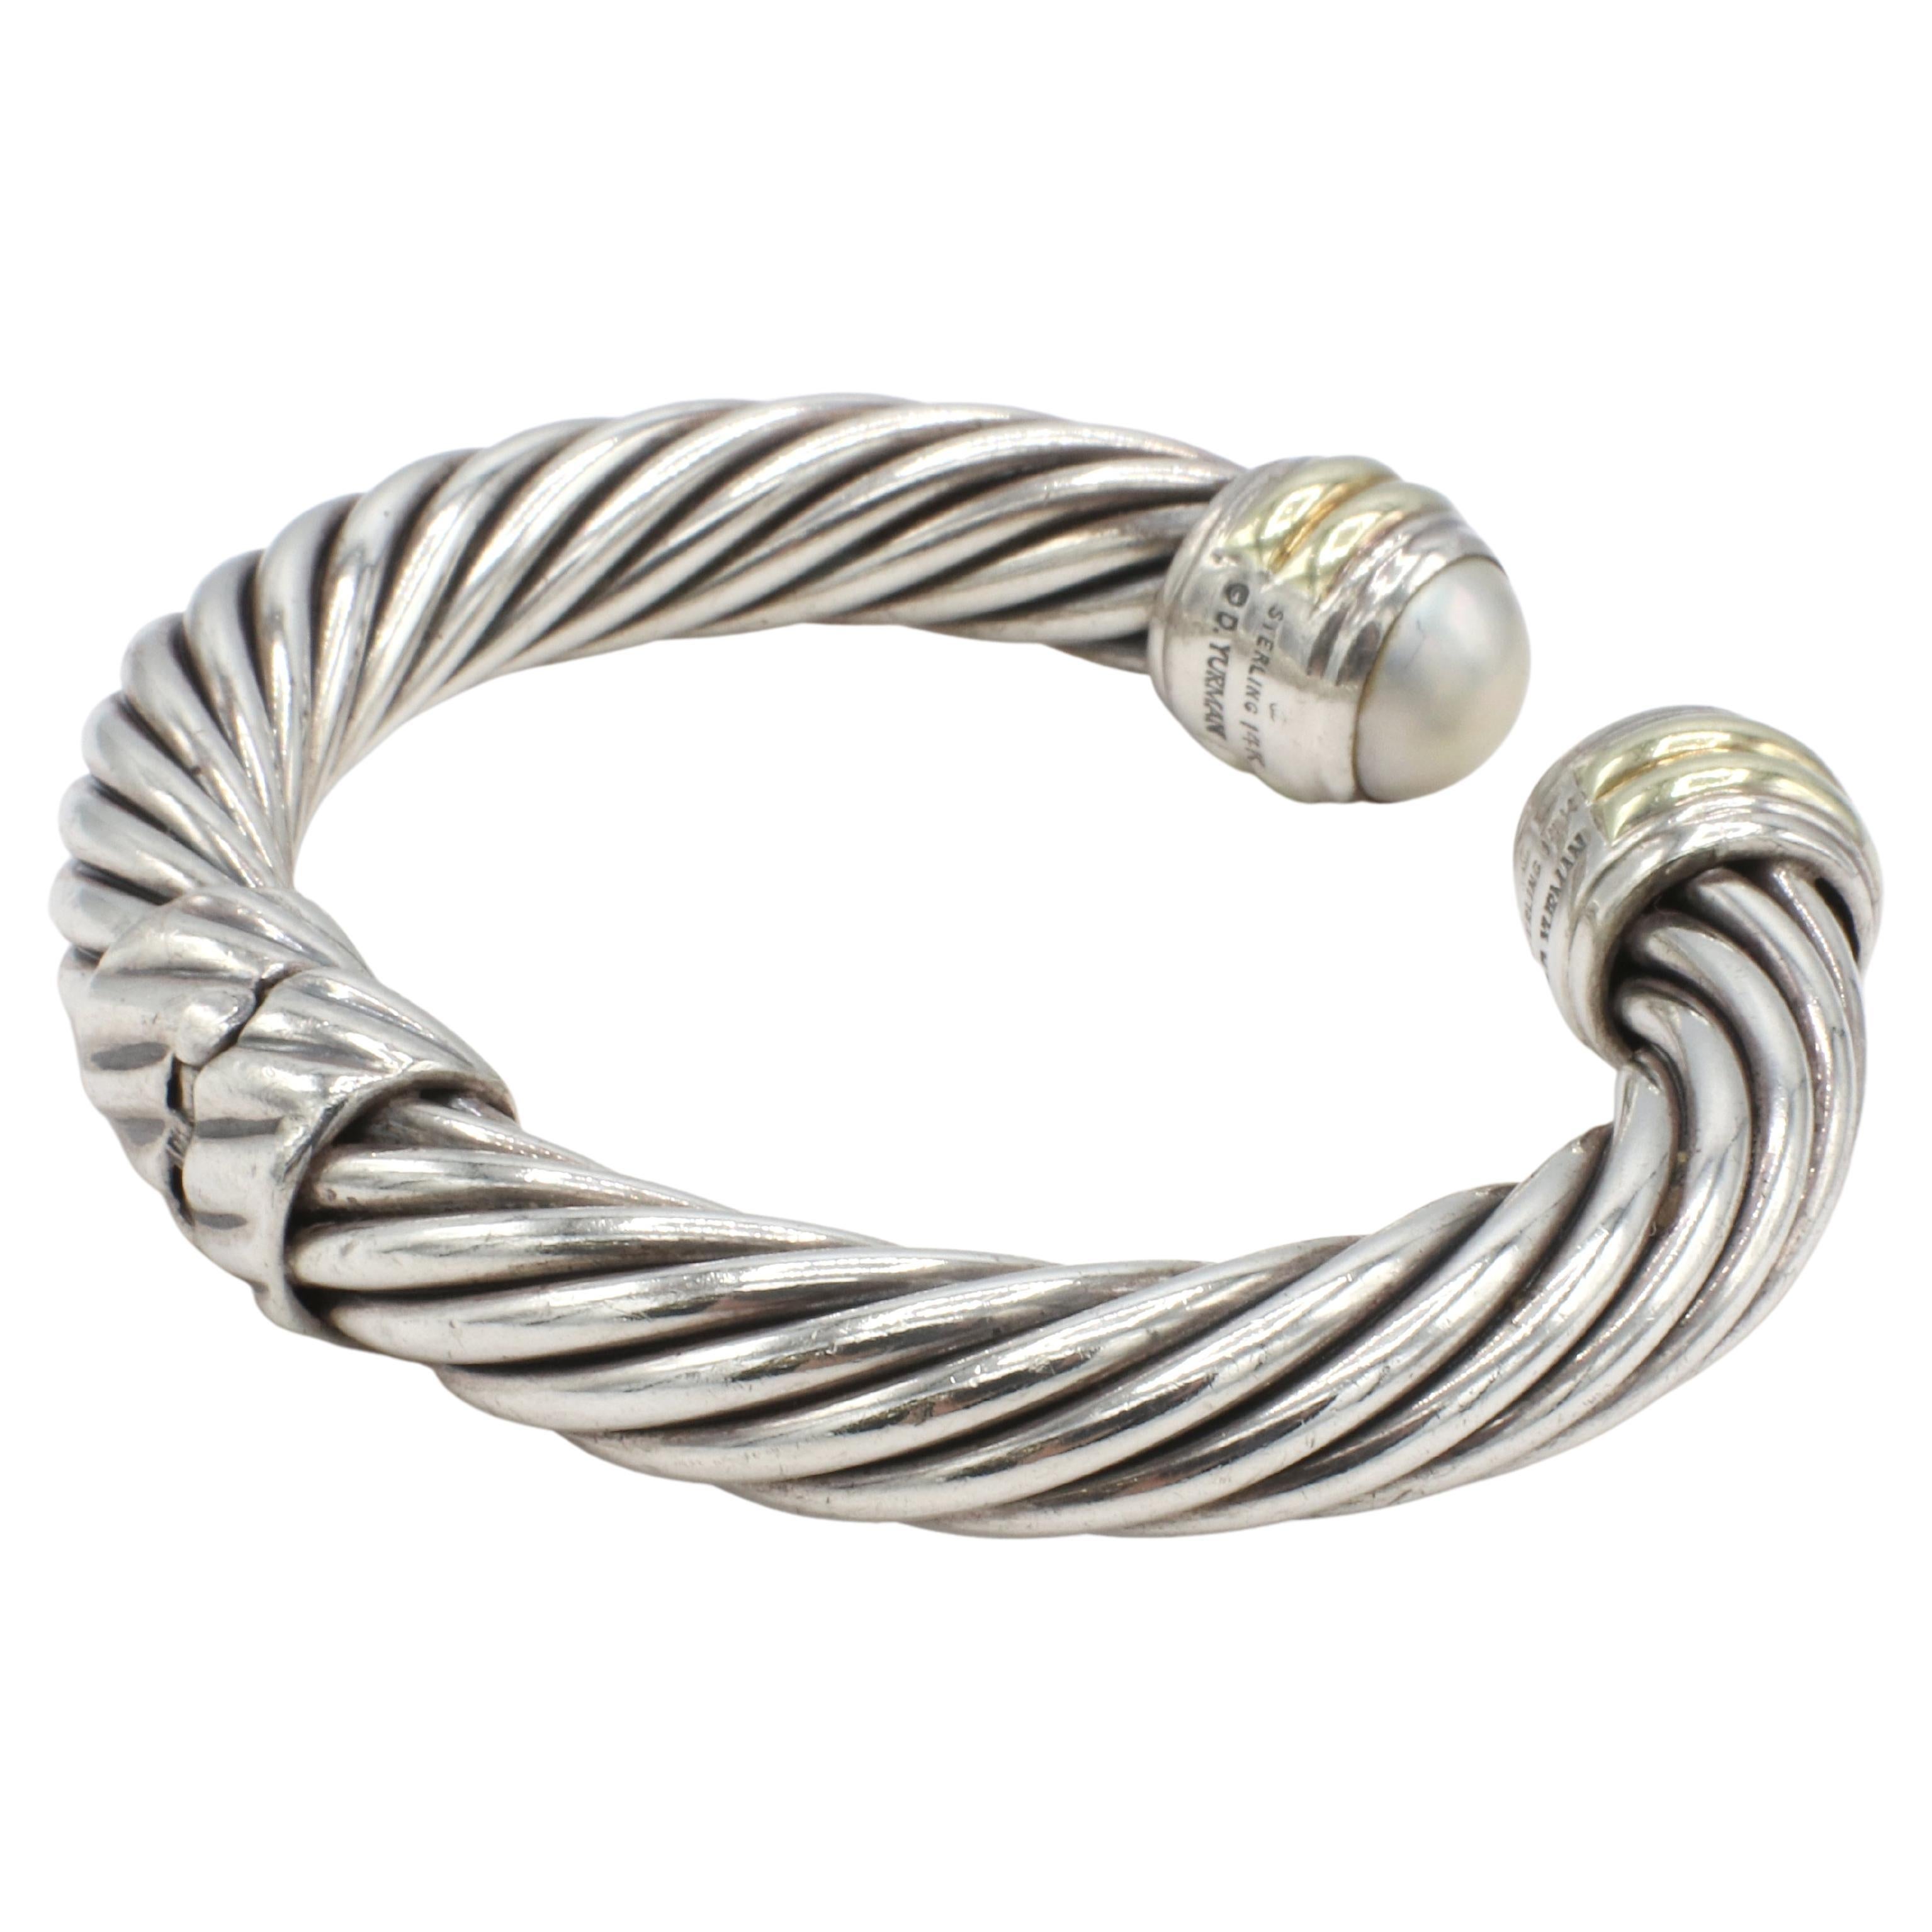 David Yurman Cable Classic Mabe Pearl Hinged Cuff Bracelet 
Metal: Sterling silver & 14k yellow gold
Weight: 45.18 grams
Width: 10mm
Circumference: Approx. 6.25 inches
Inside Diameter: 55mm
Note: Slight surface scratches and small dents 